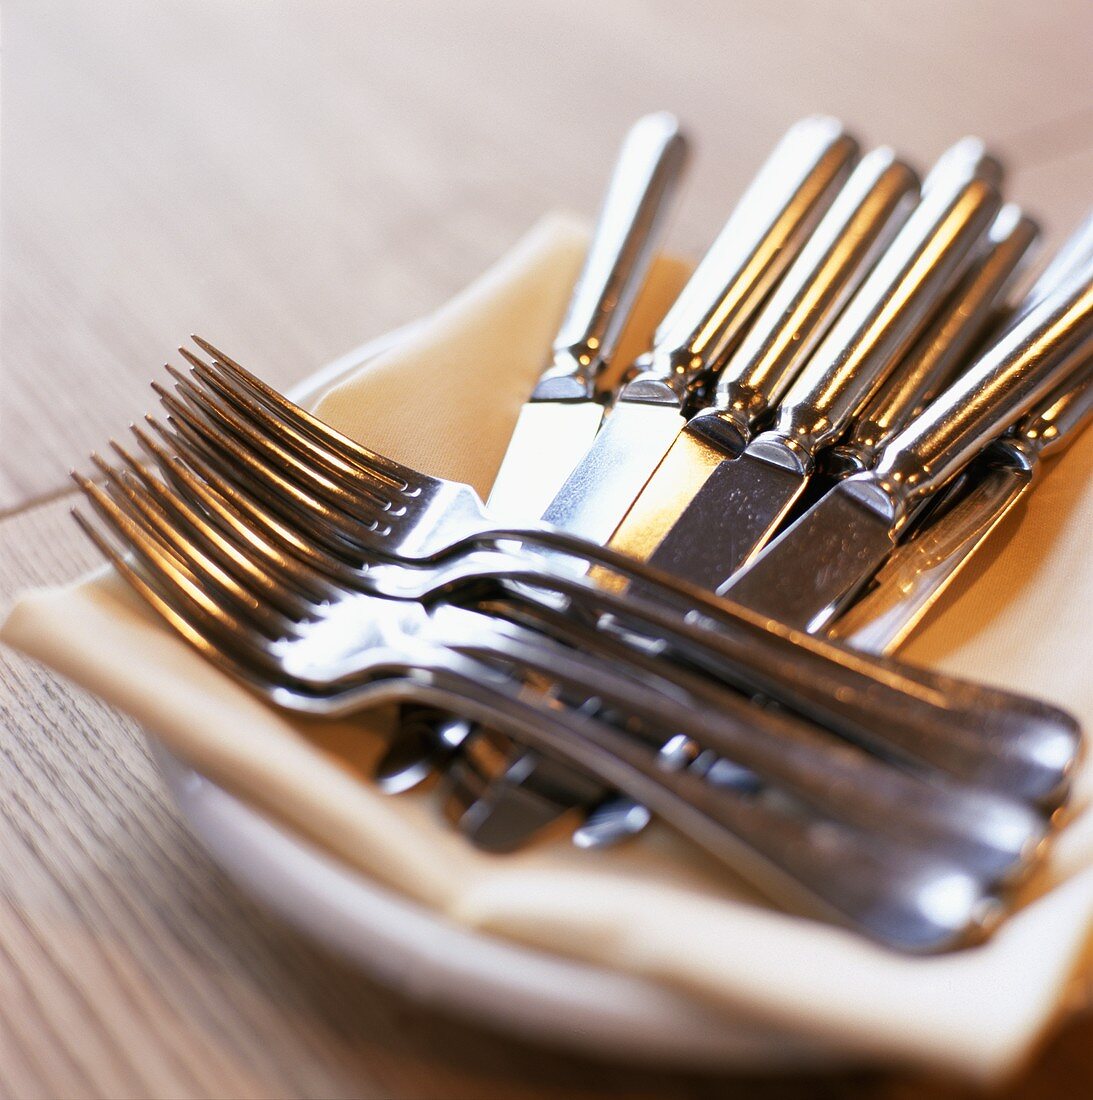 Knives and forks on a plate with fabric napkin